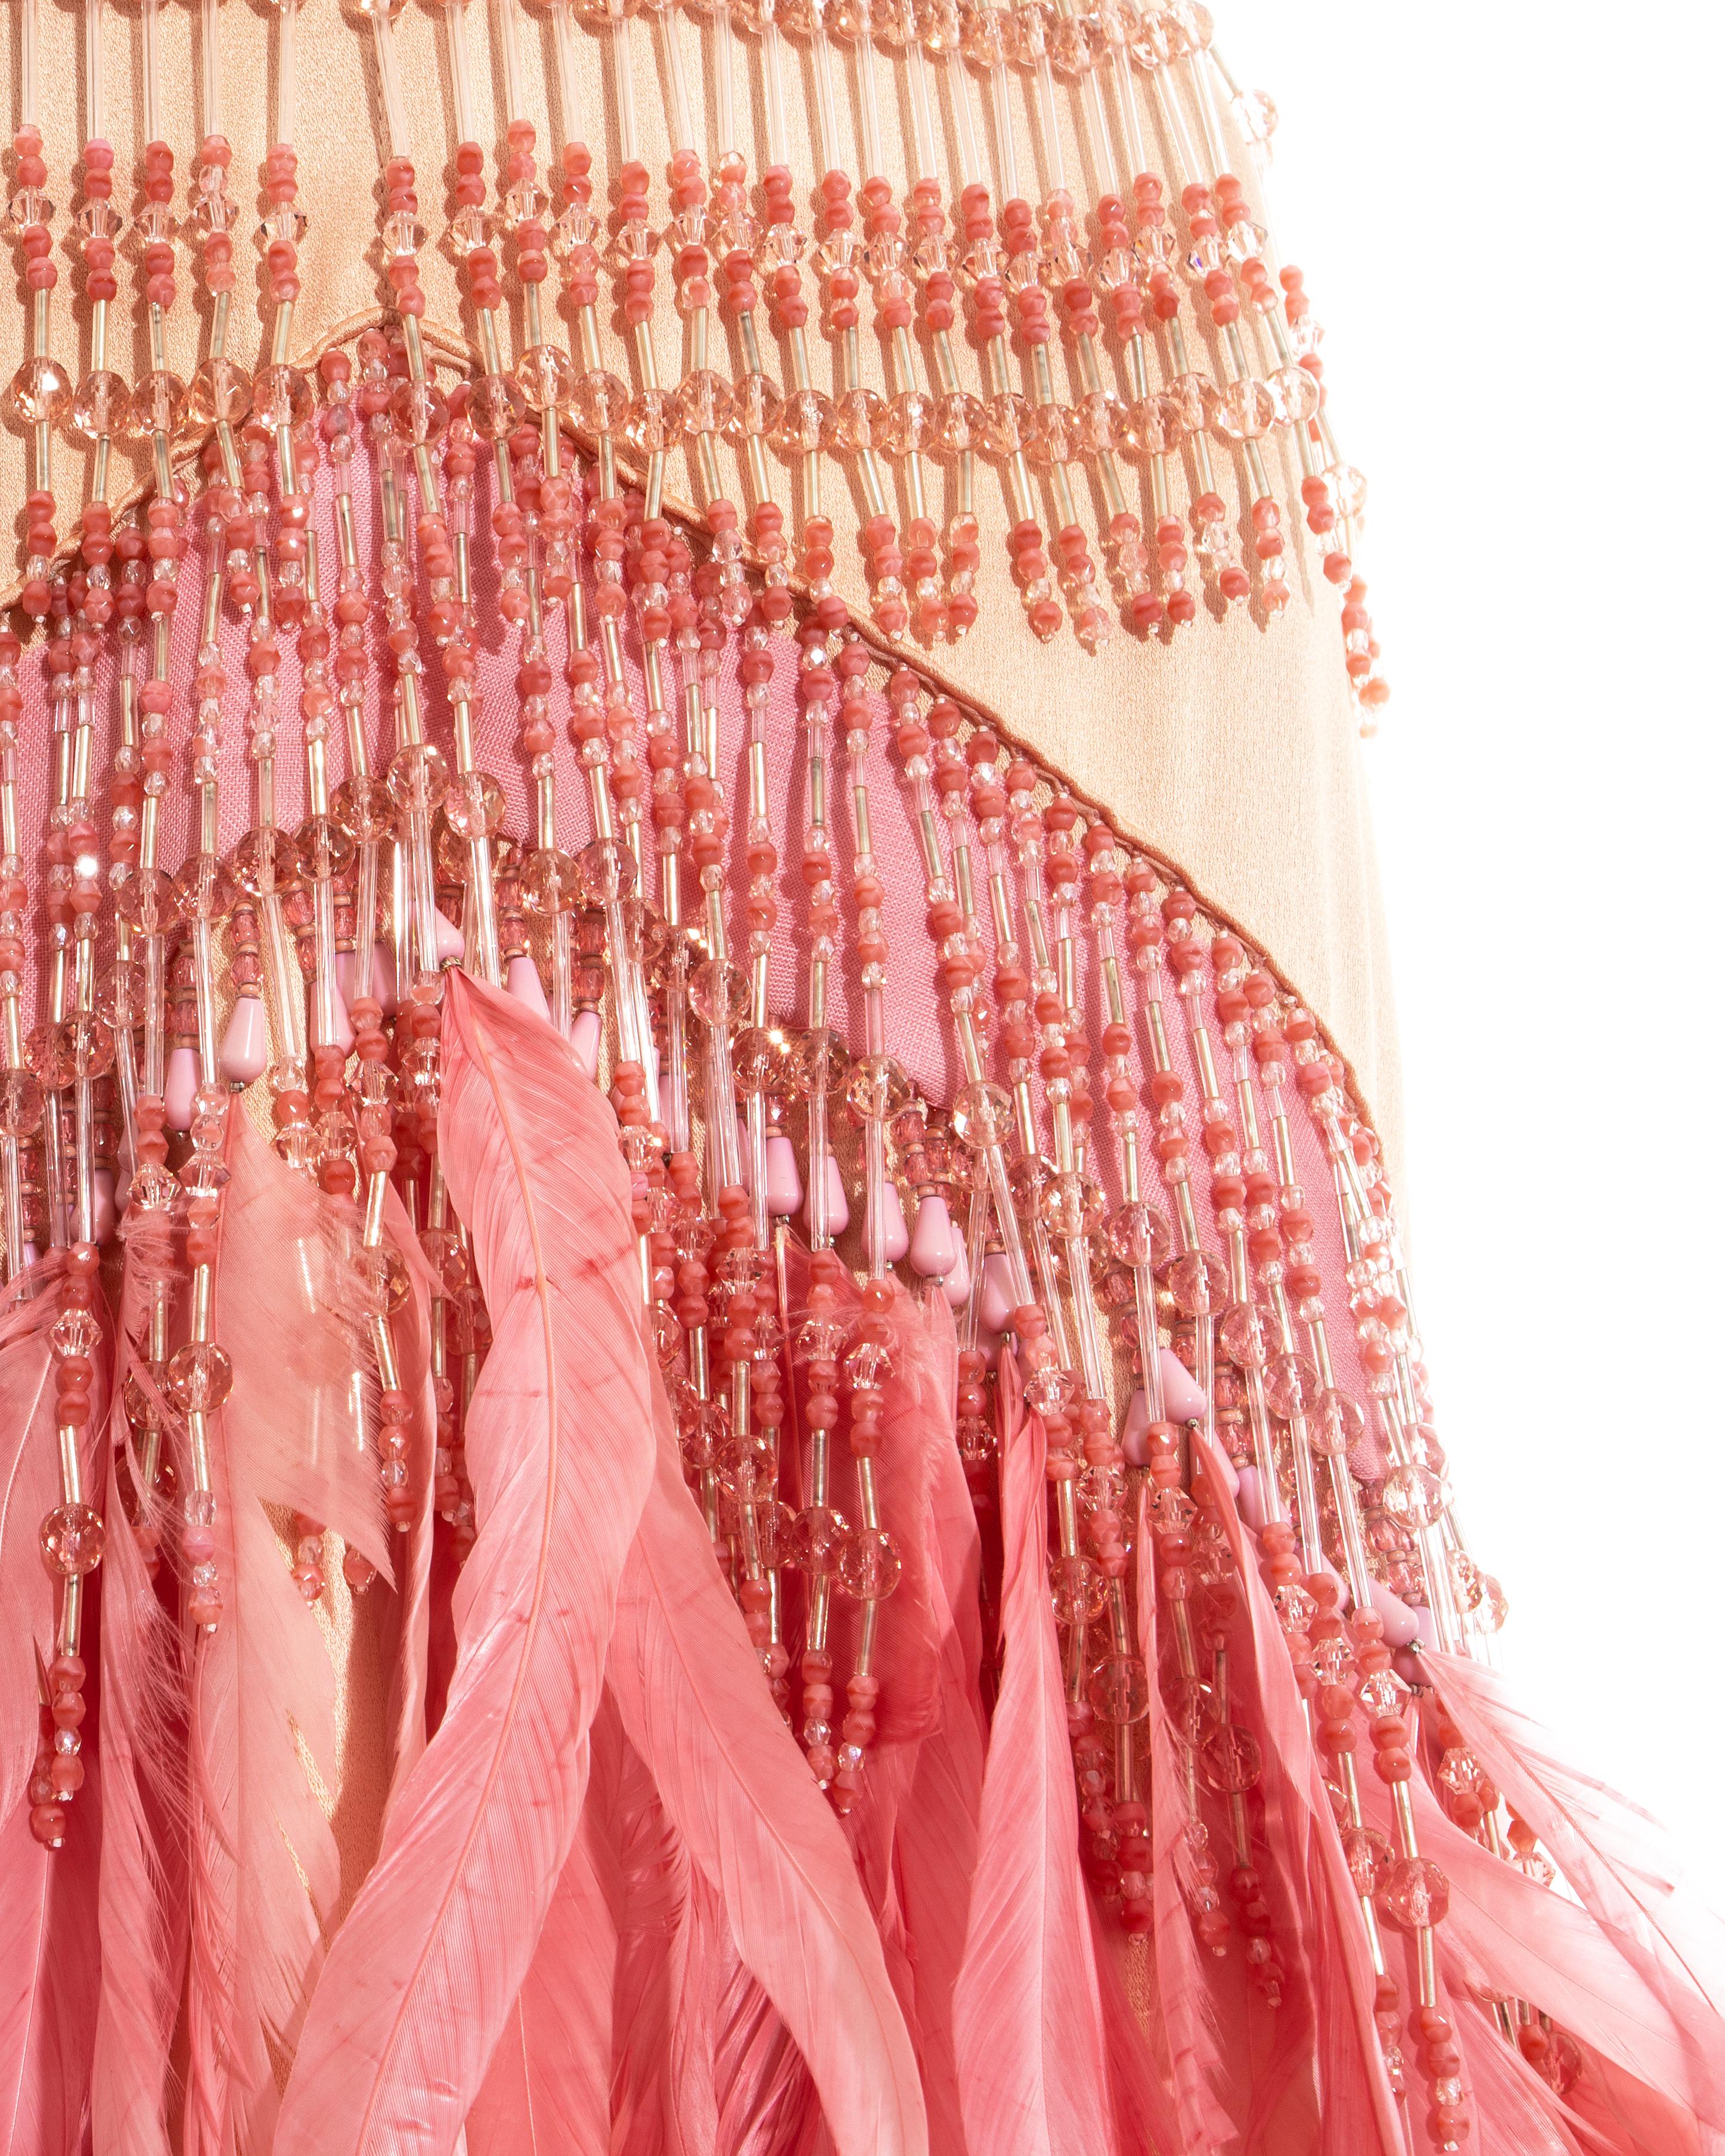 Women's Prada pink crystal and feather fringe bra and skirt ensemble, fw 2017